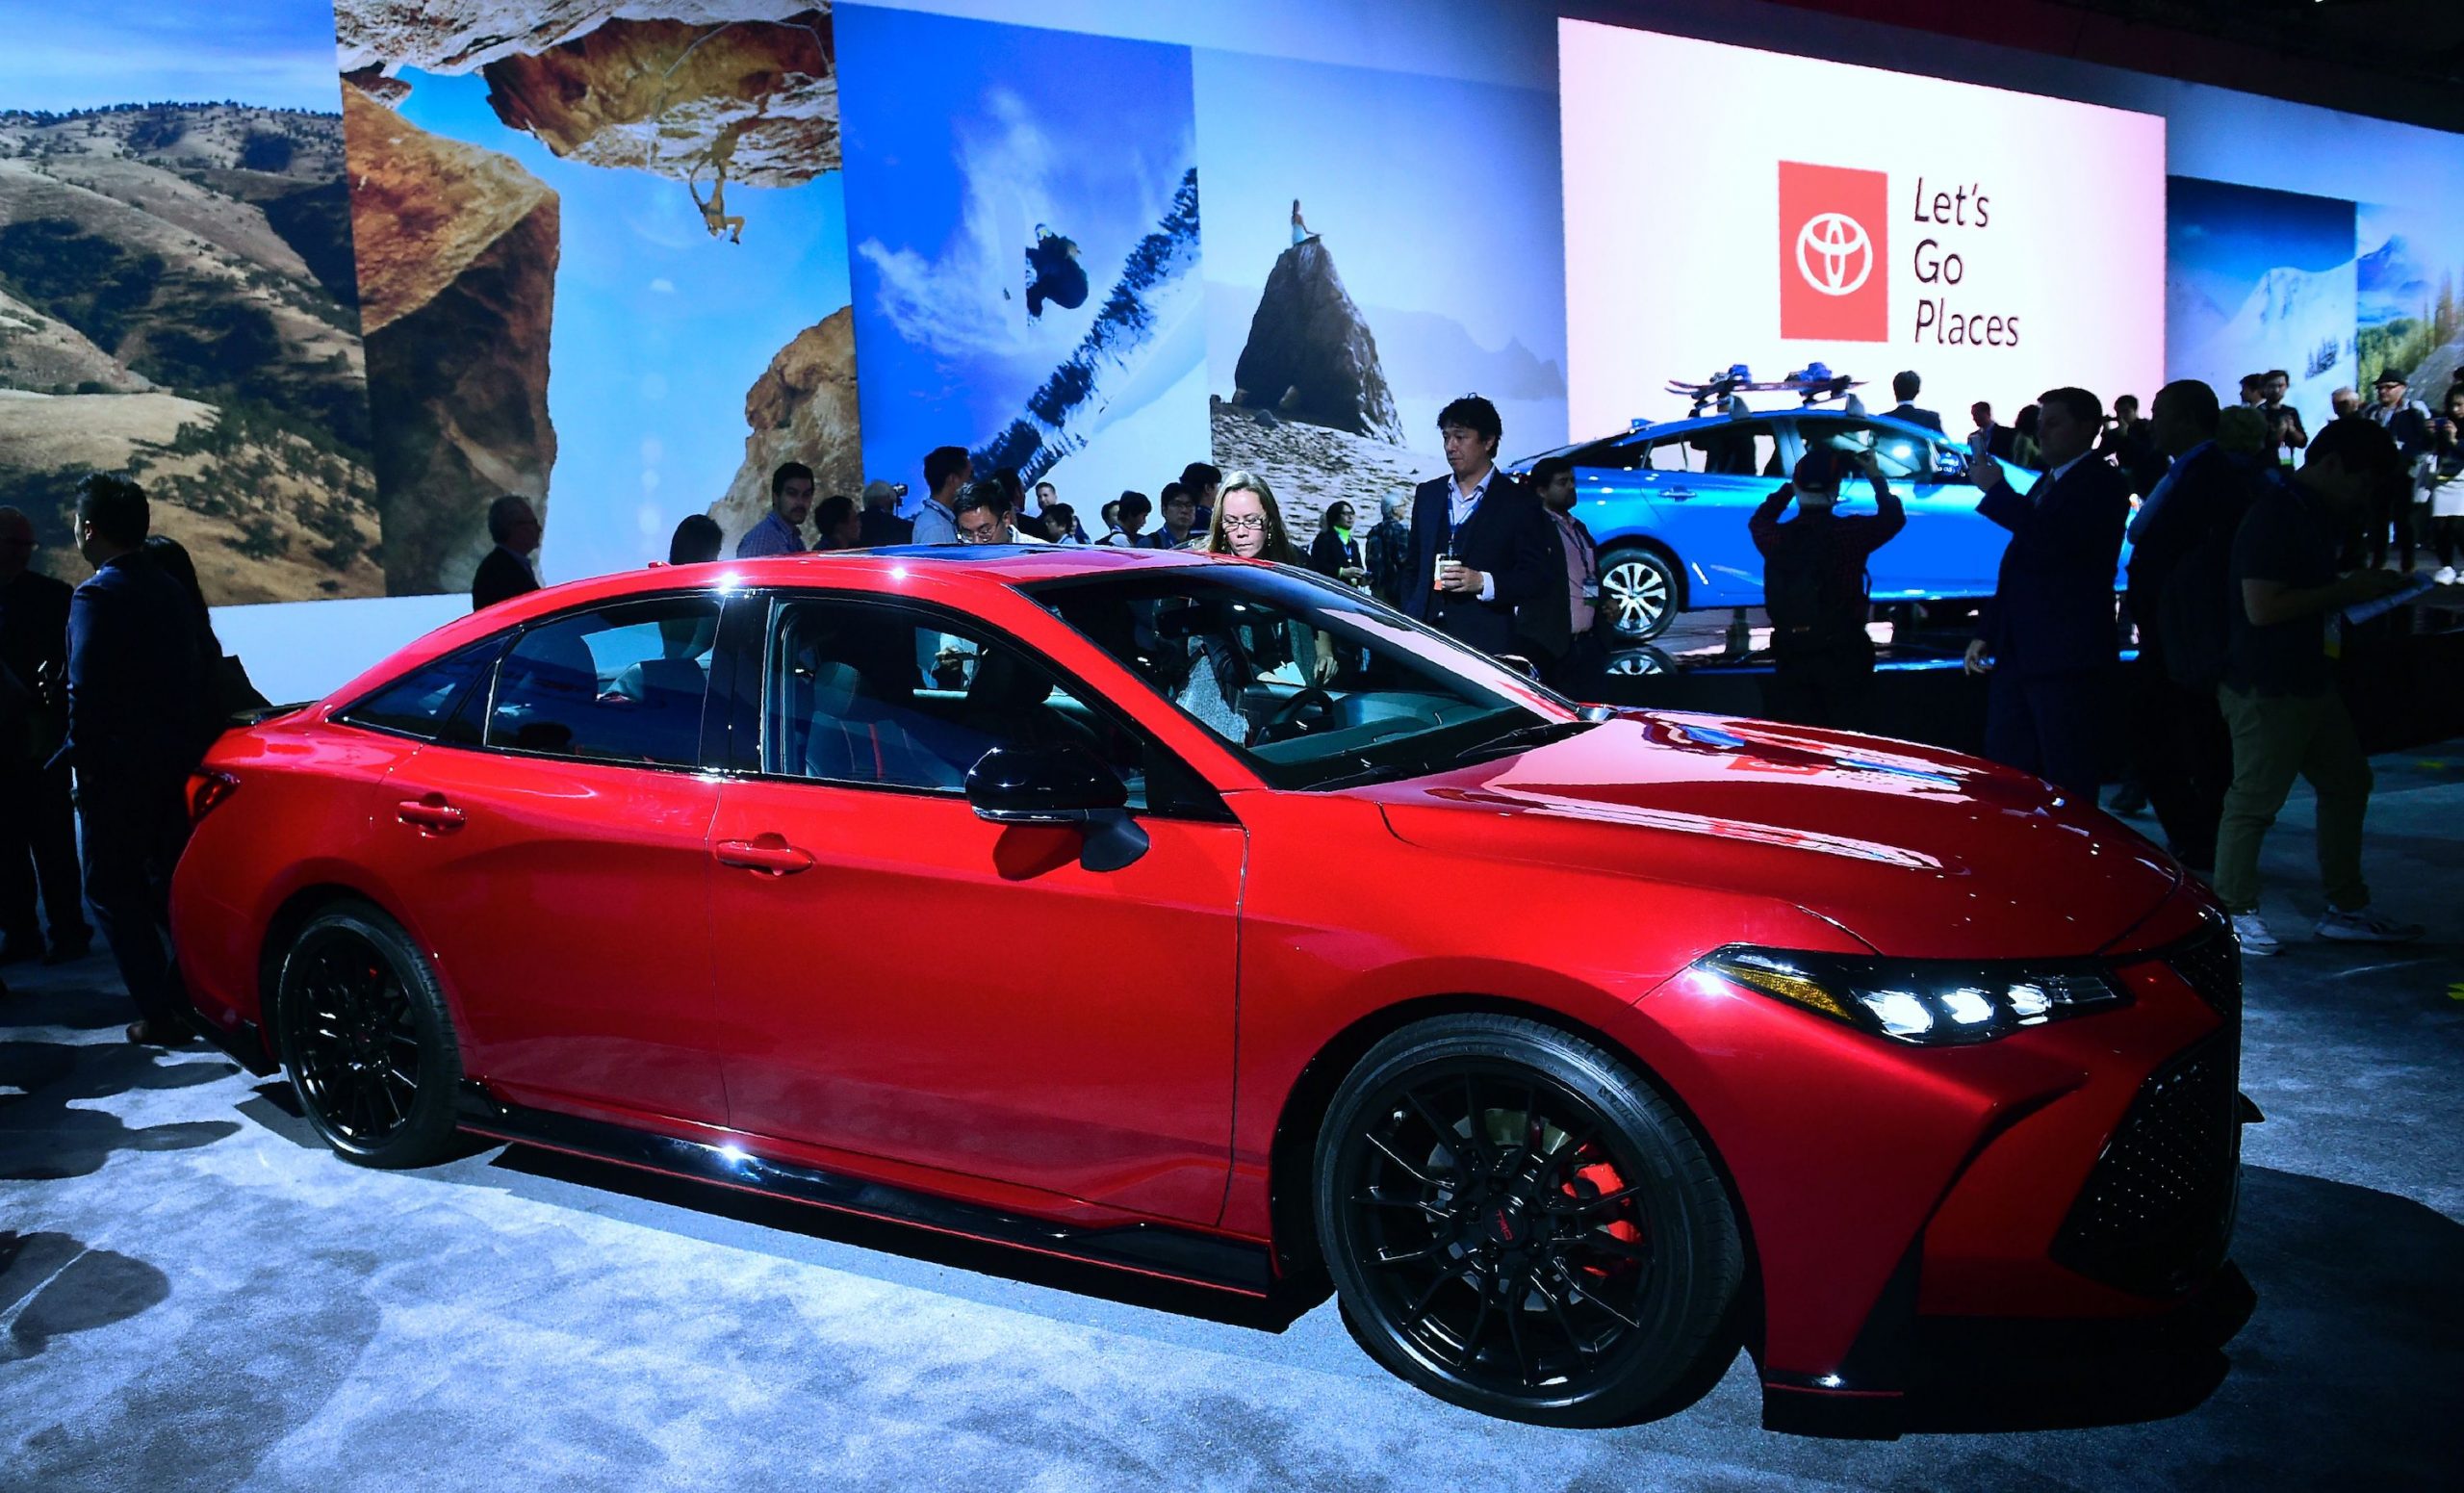 People take a closer look at the new red 2019 Toyota Avalon TRD on display